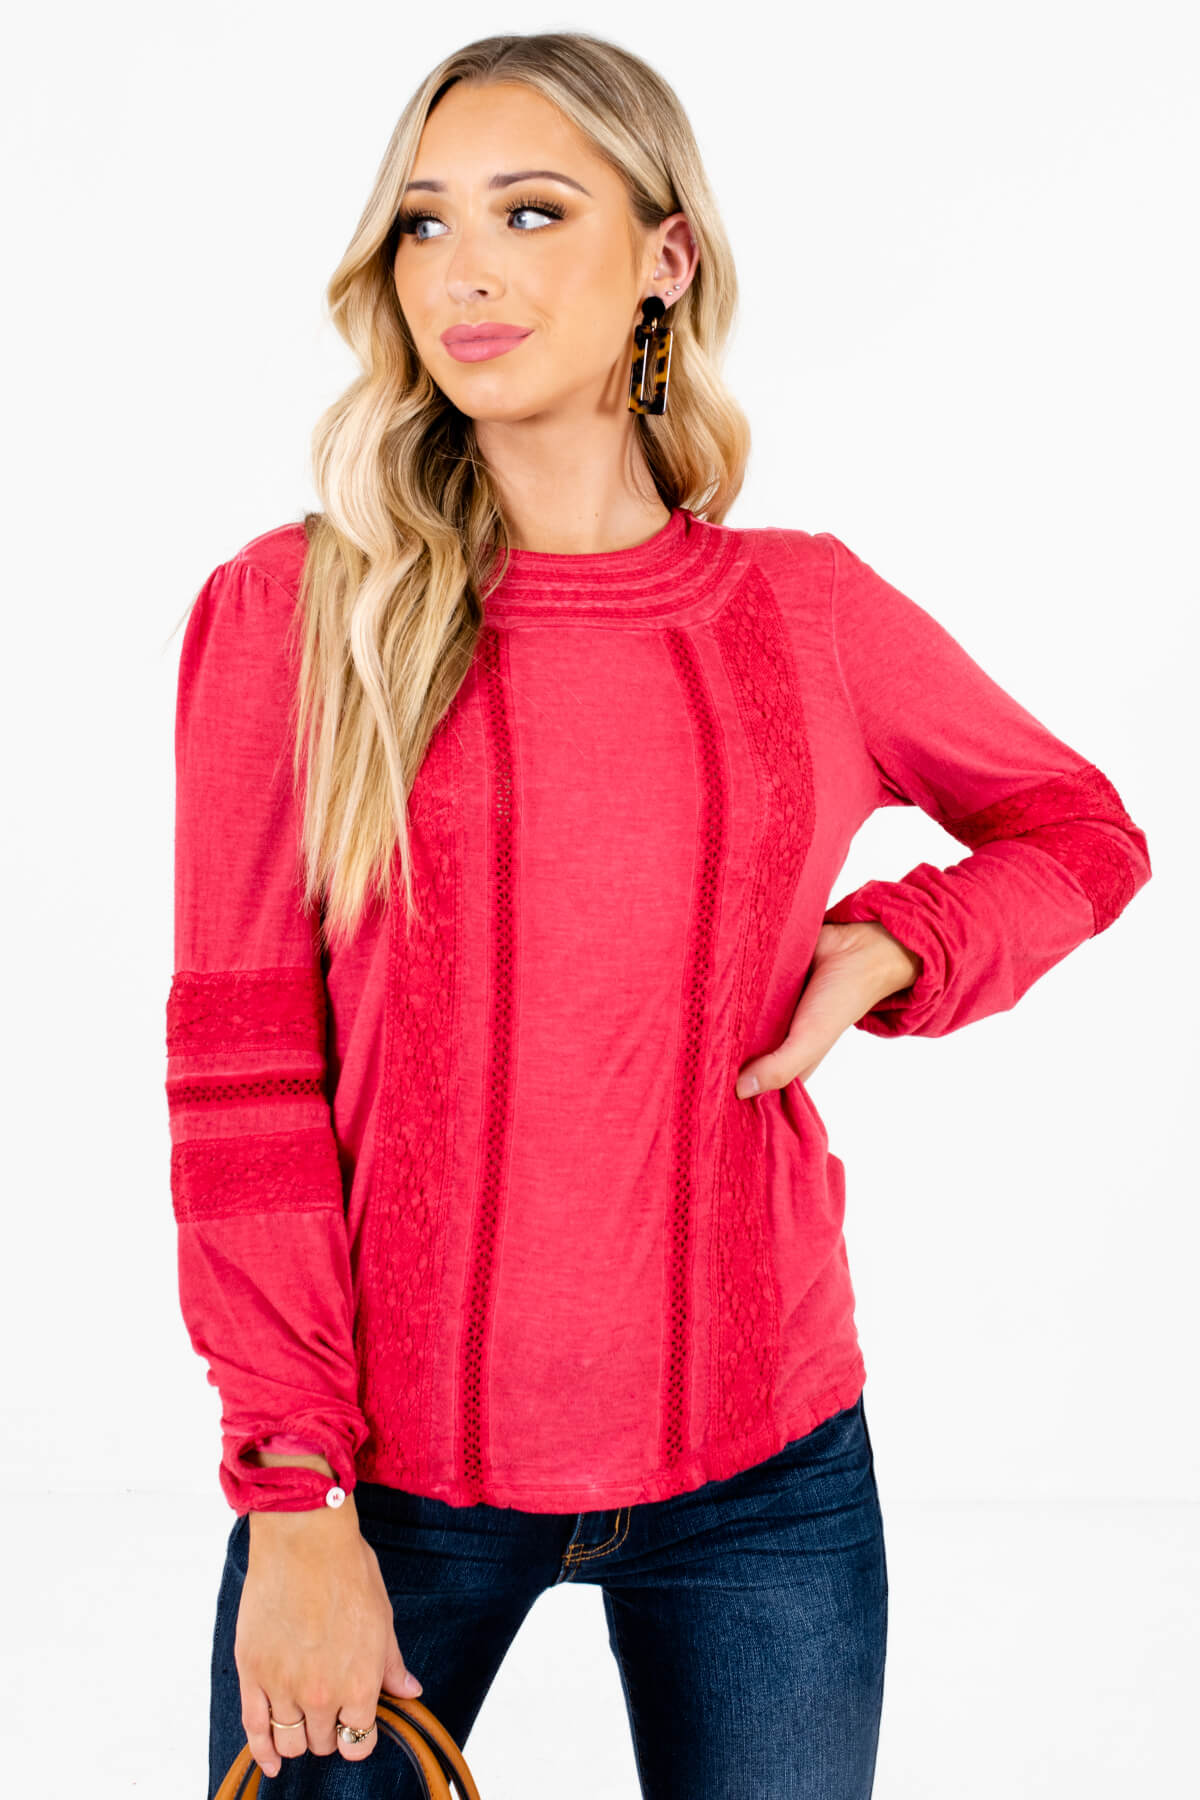 Red Crochet Lace Accented Boutique Tops for Women